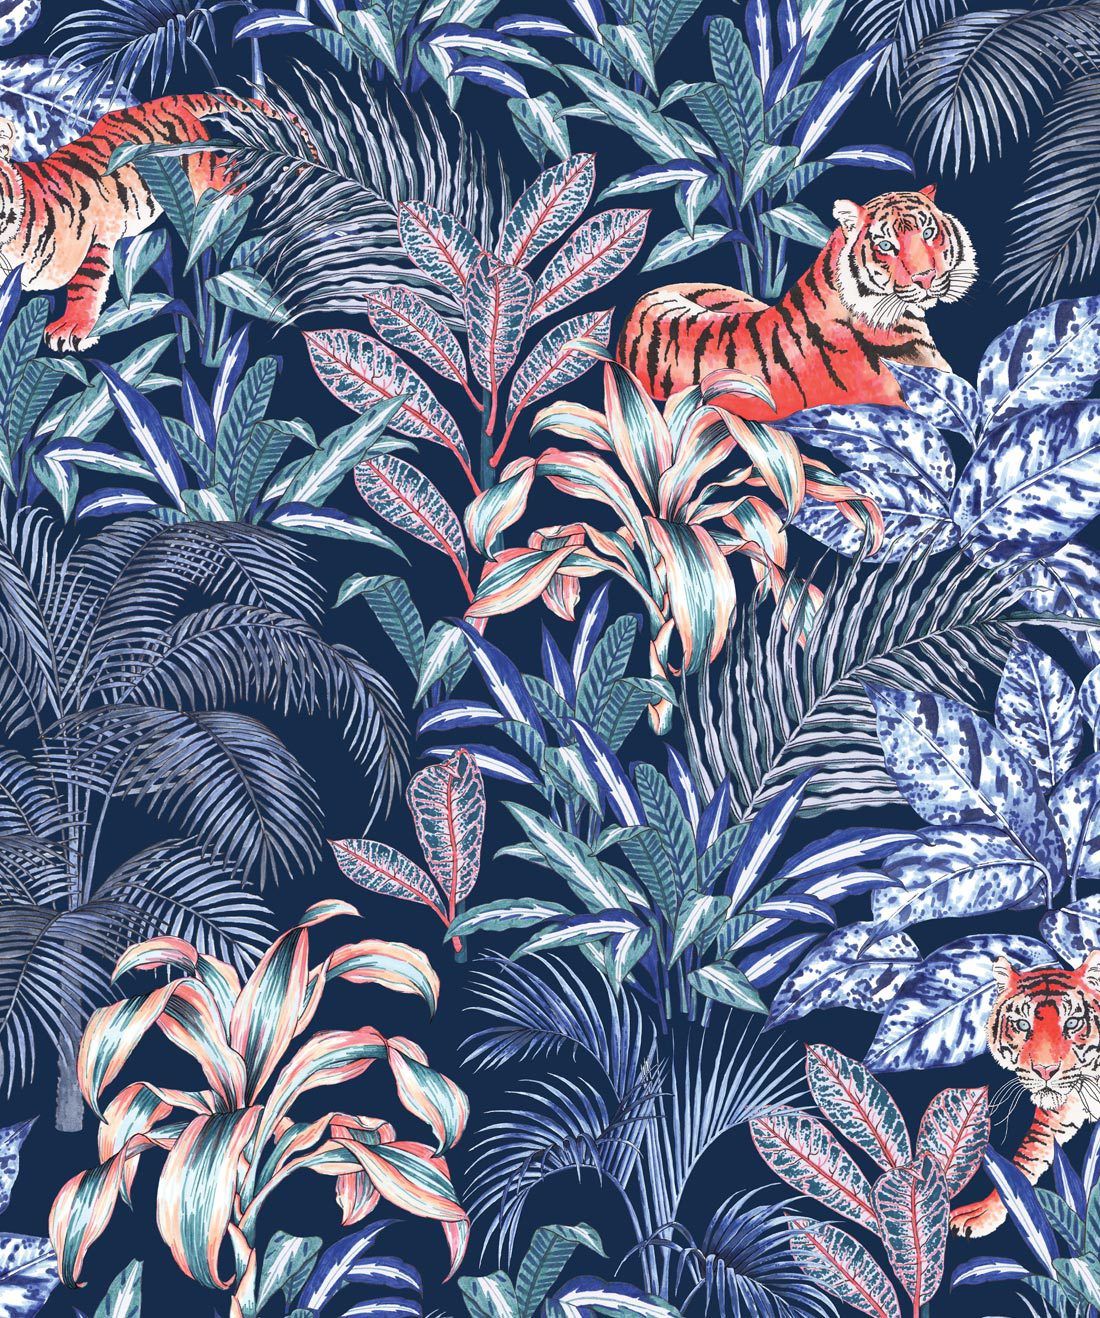 Jungle Tiger Wallpaper • Tropical Wallpaper • Jacqueline Colley • Blue • Swatch